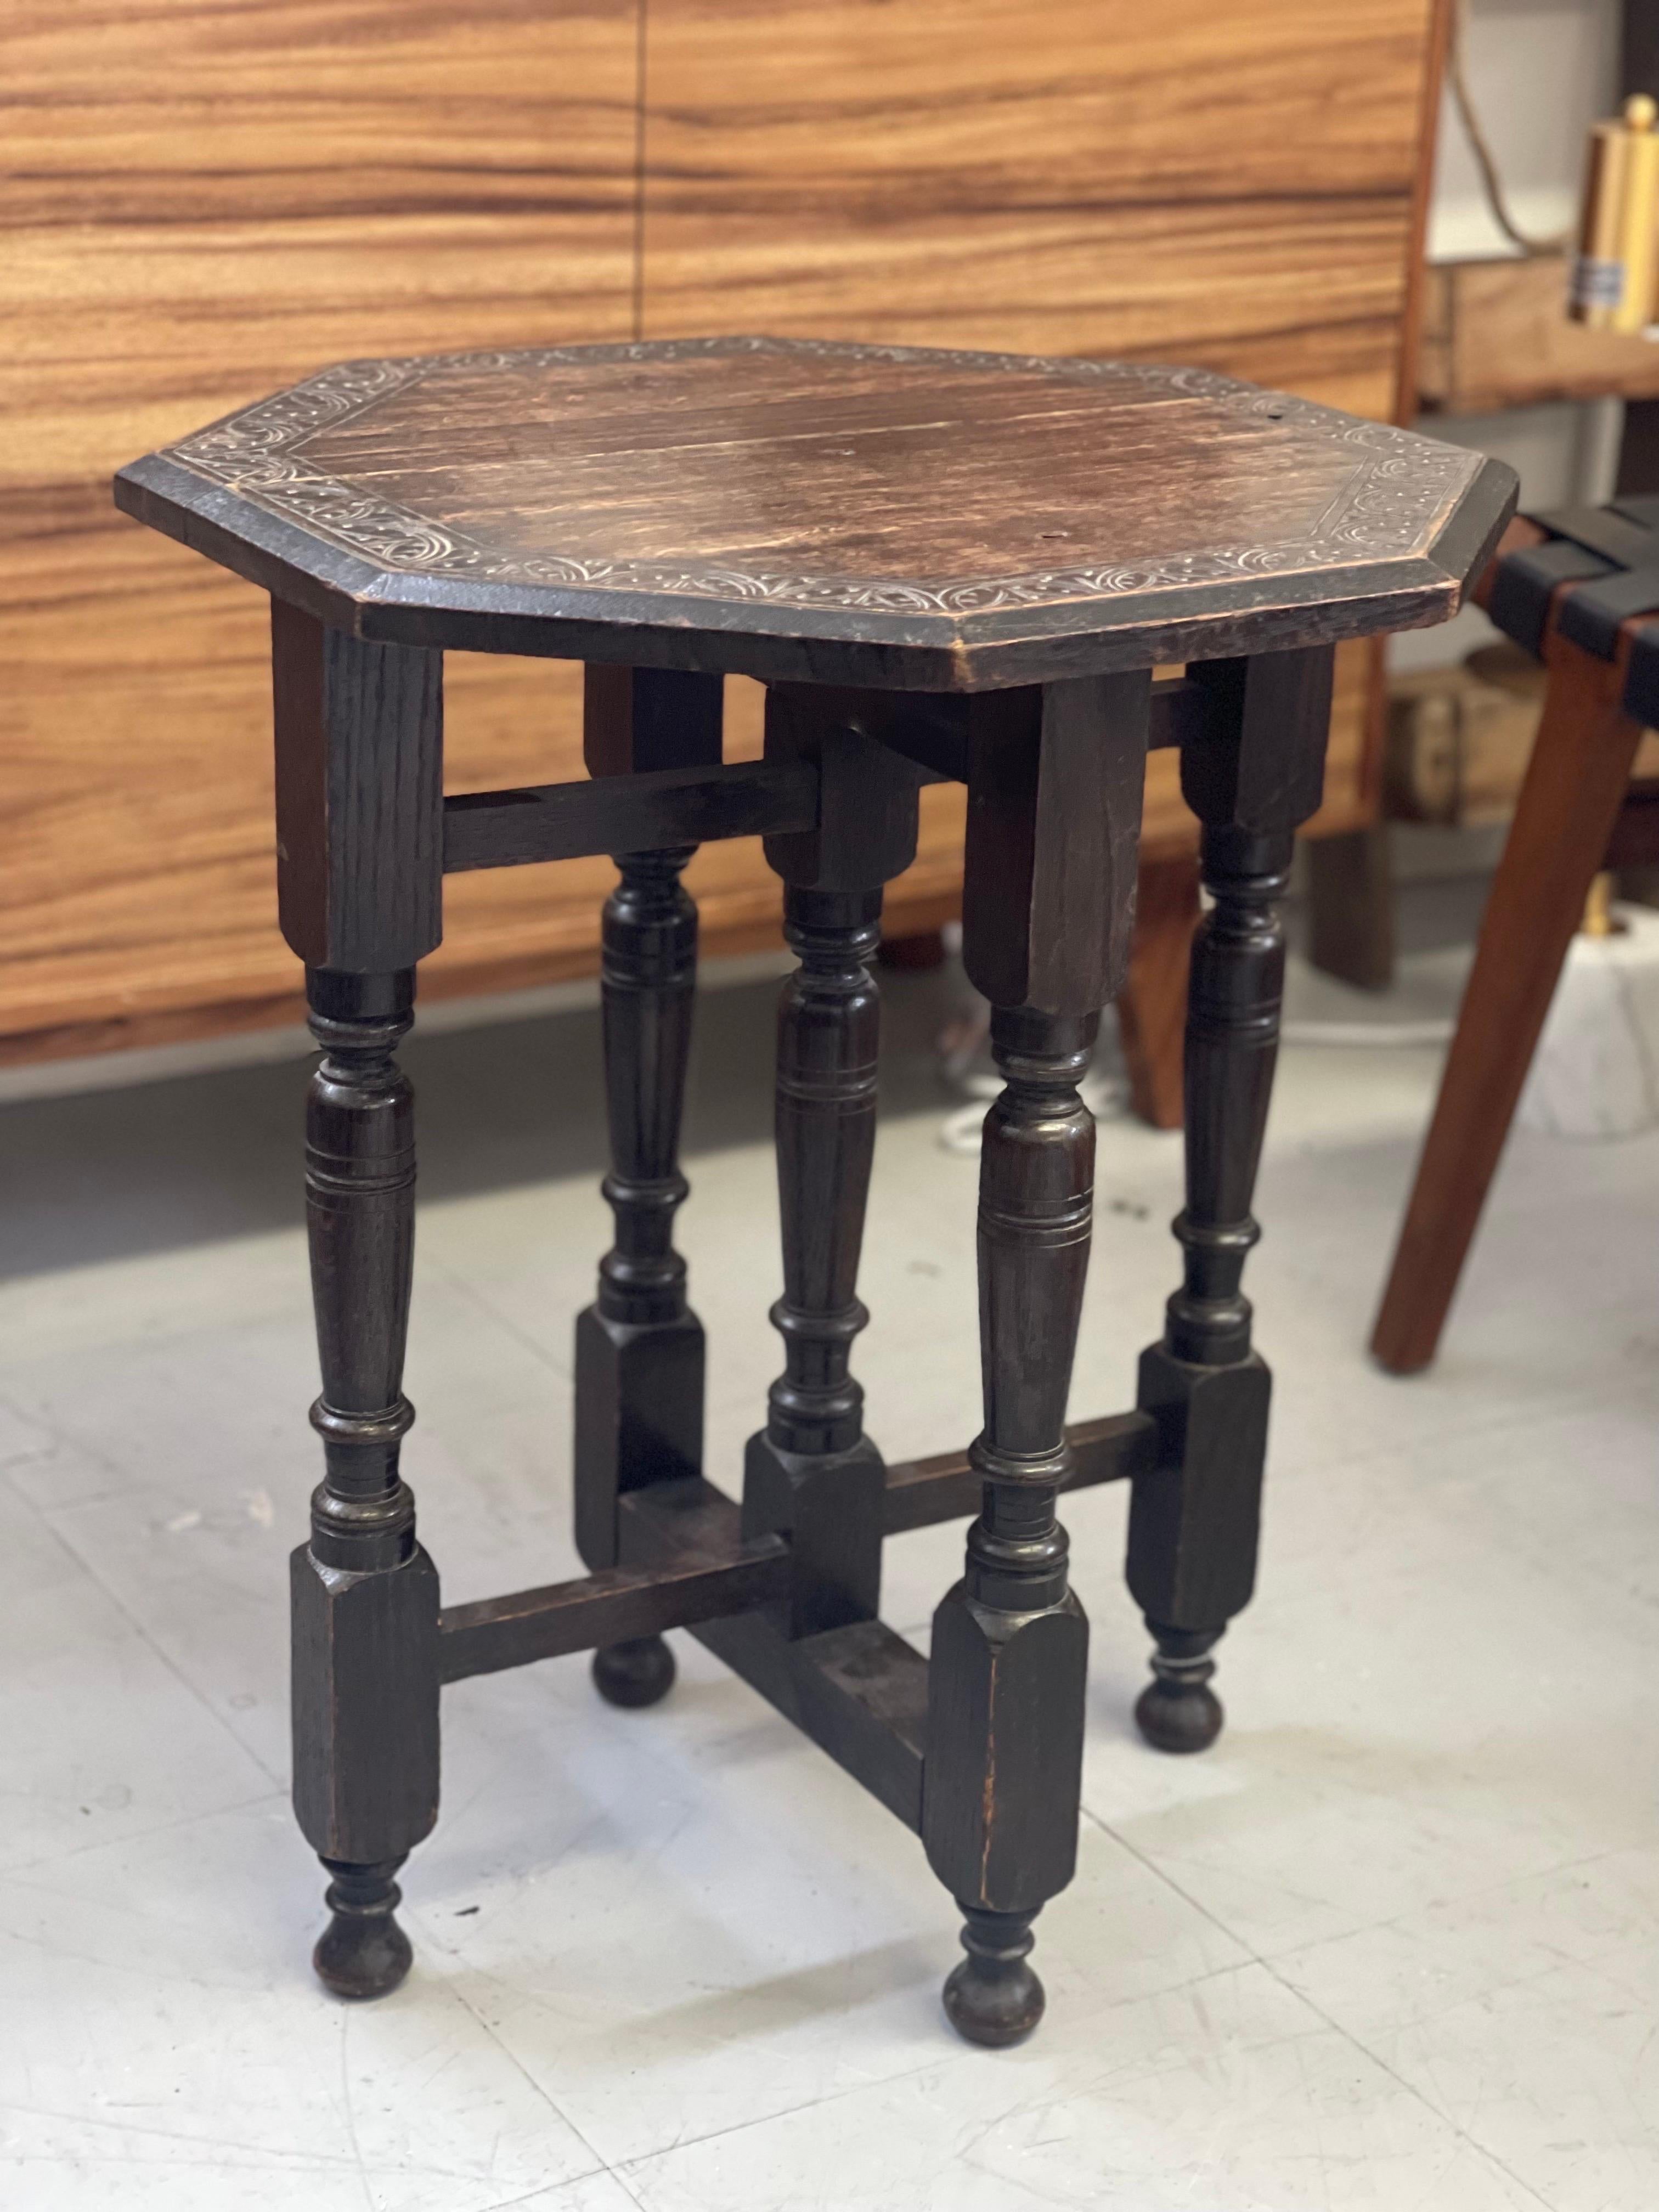 Antique table stand. Uk Import. This Table has Primitive Style and hand Carved Floral Design and has Great Character patina to the Wood.

Dimensions. 20 W ; 19 1/2 D, 24 H.